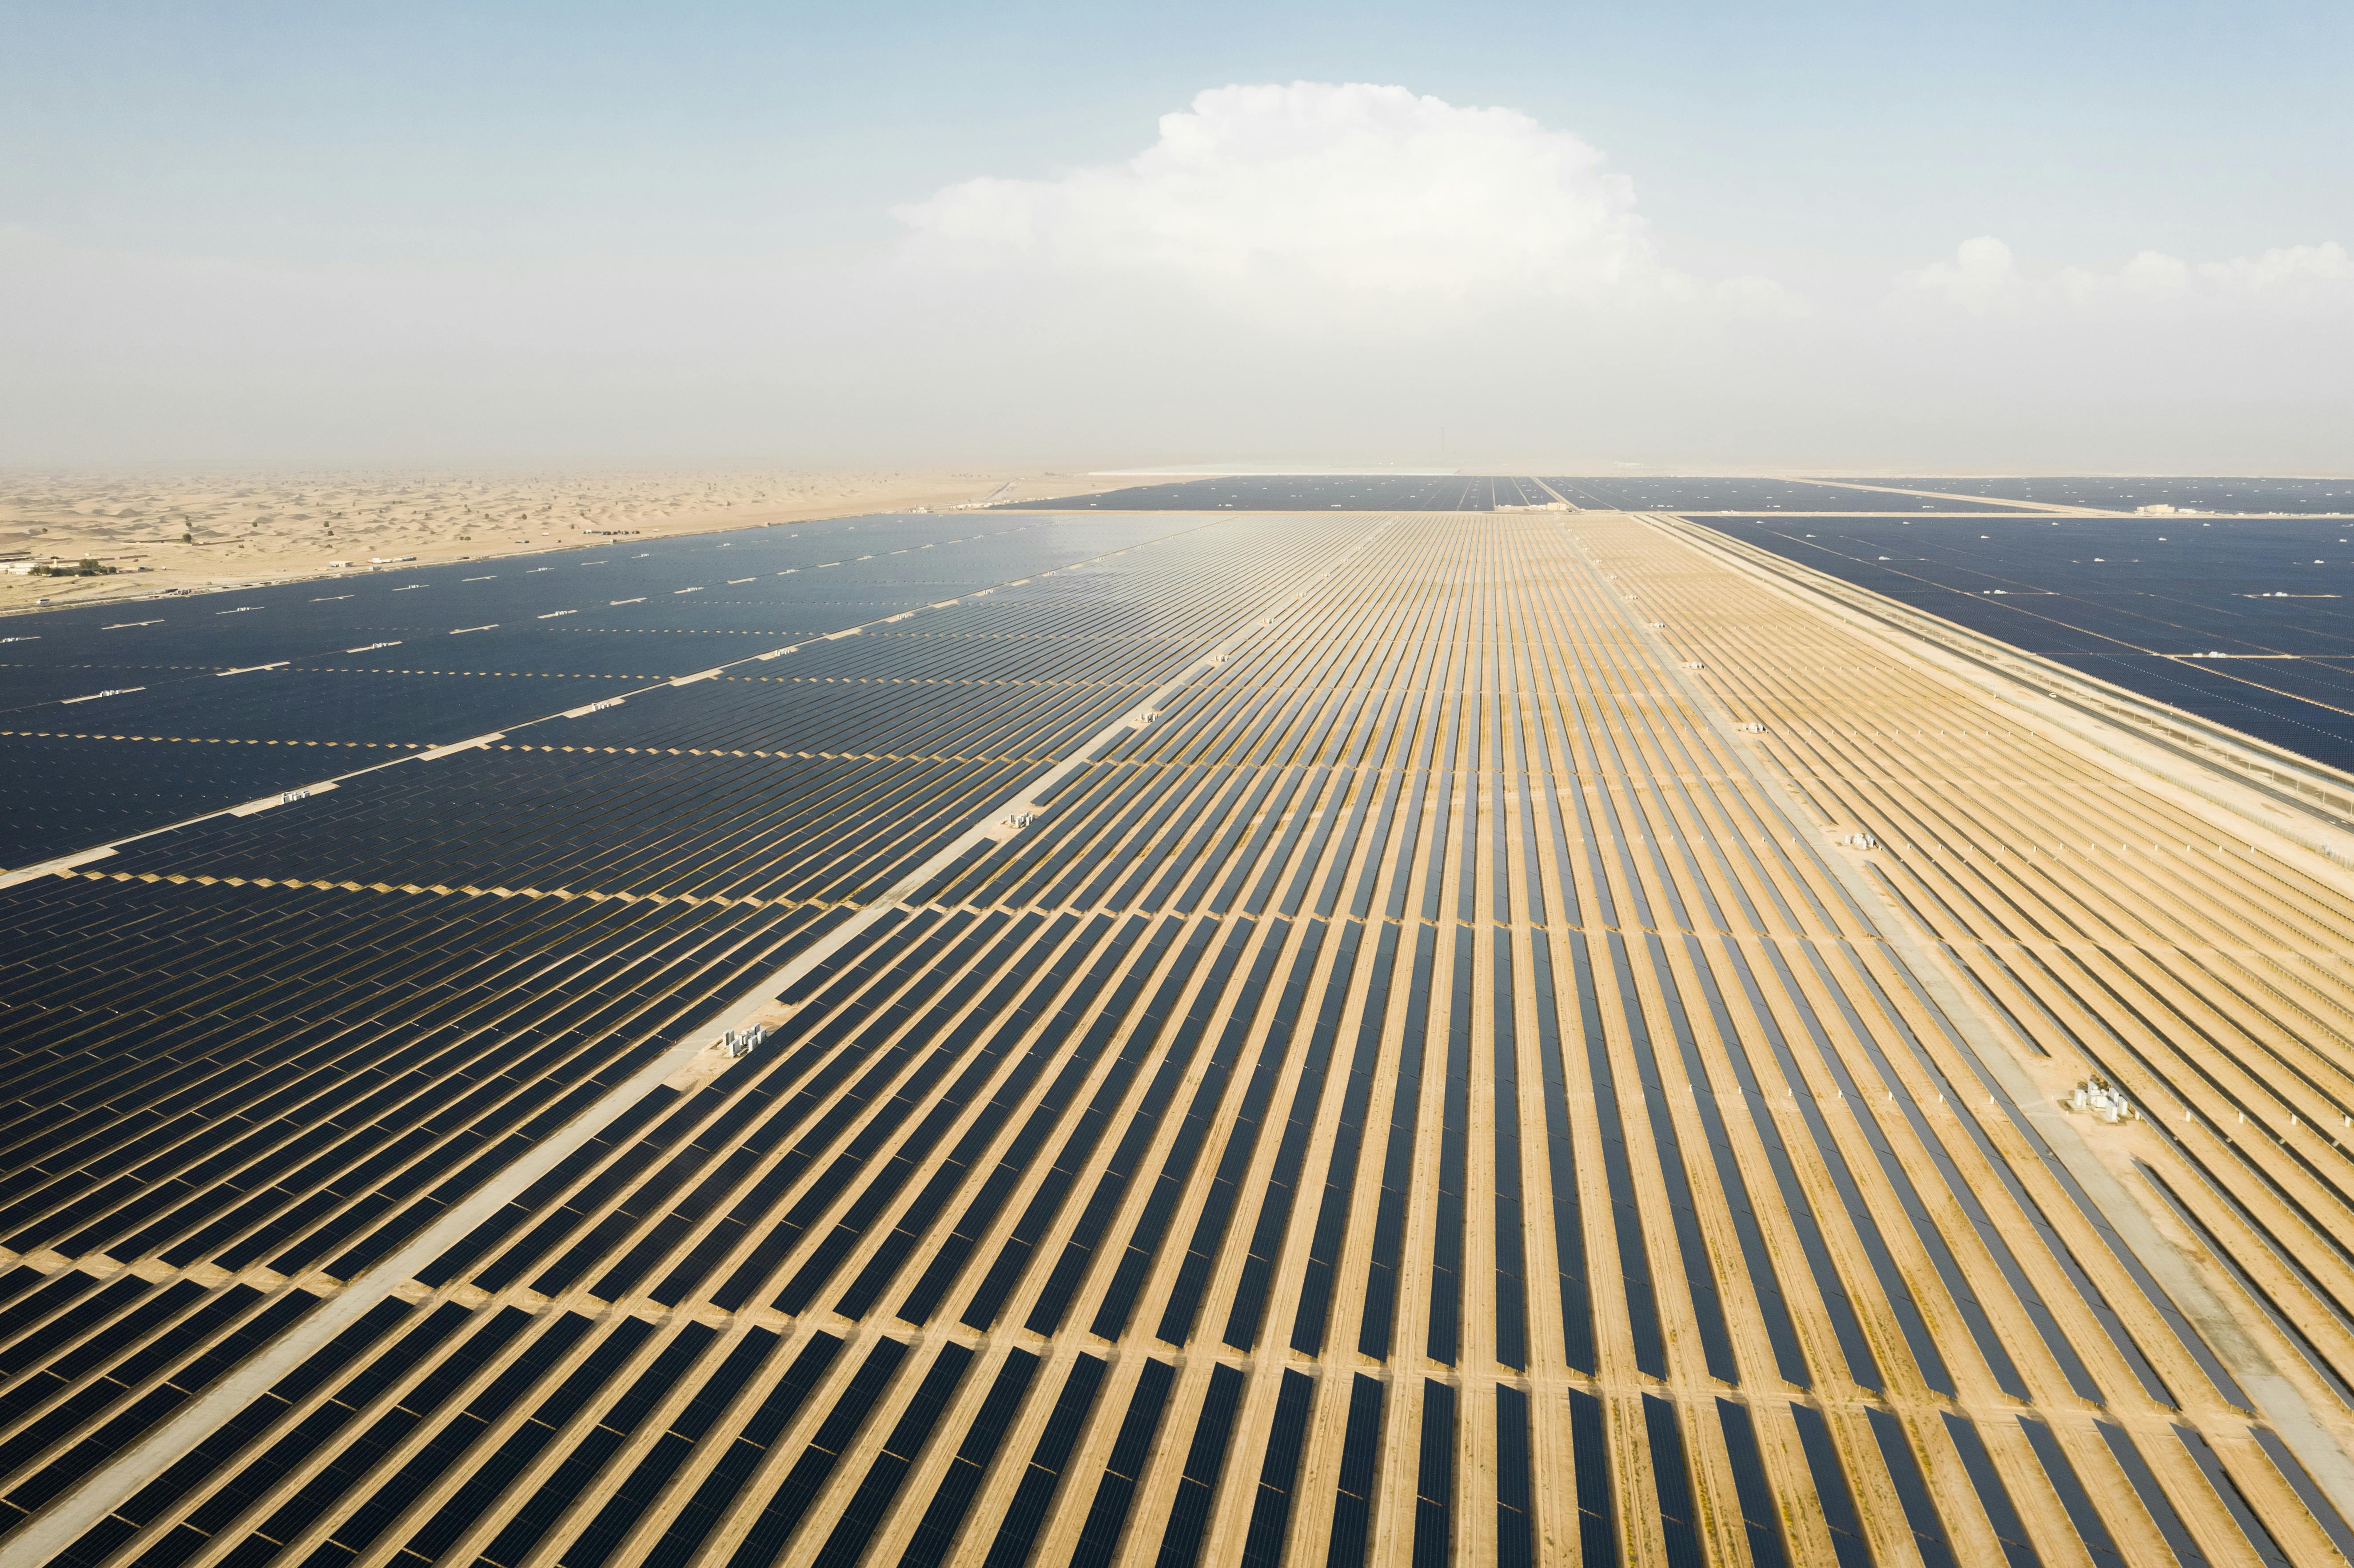 Photo depicts an Aerial view of a landscape with photovoltaic solar panel farm producing sustainable renewable energy in a desert power plant.